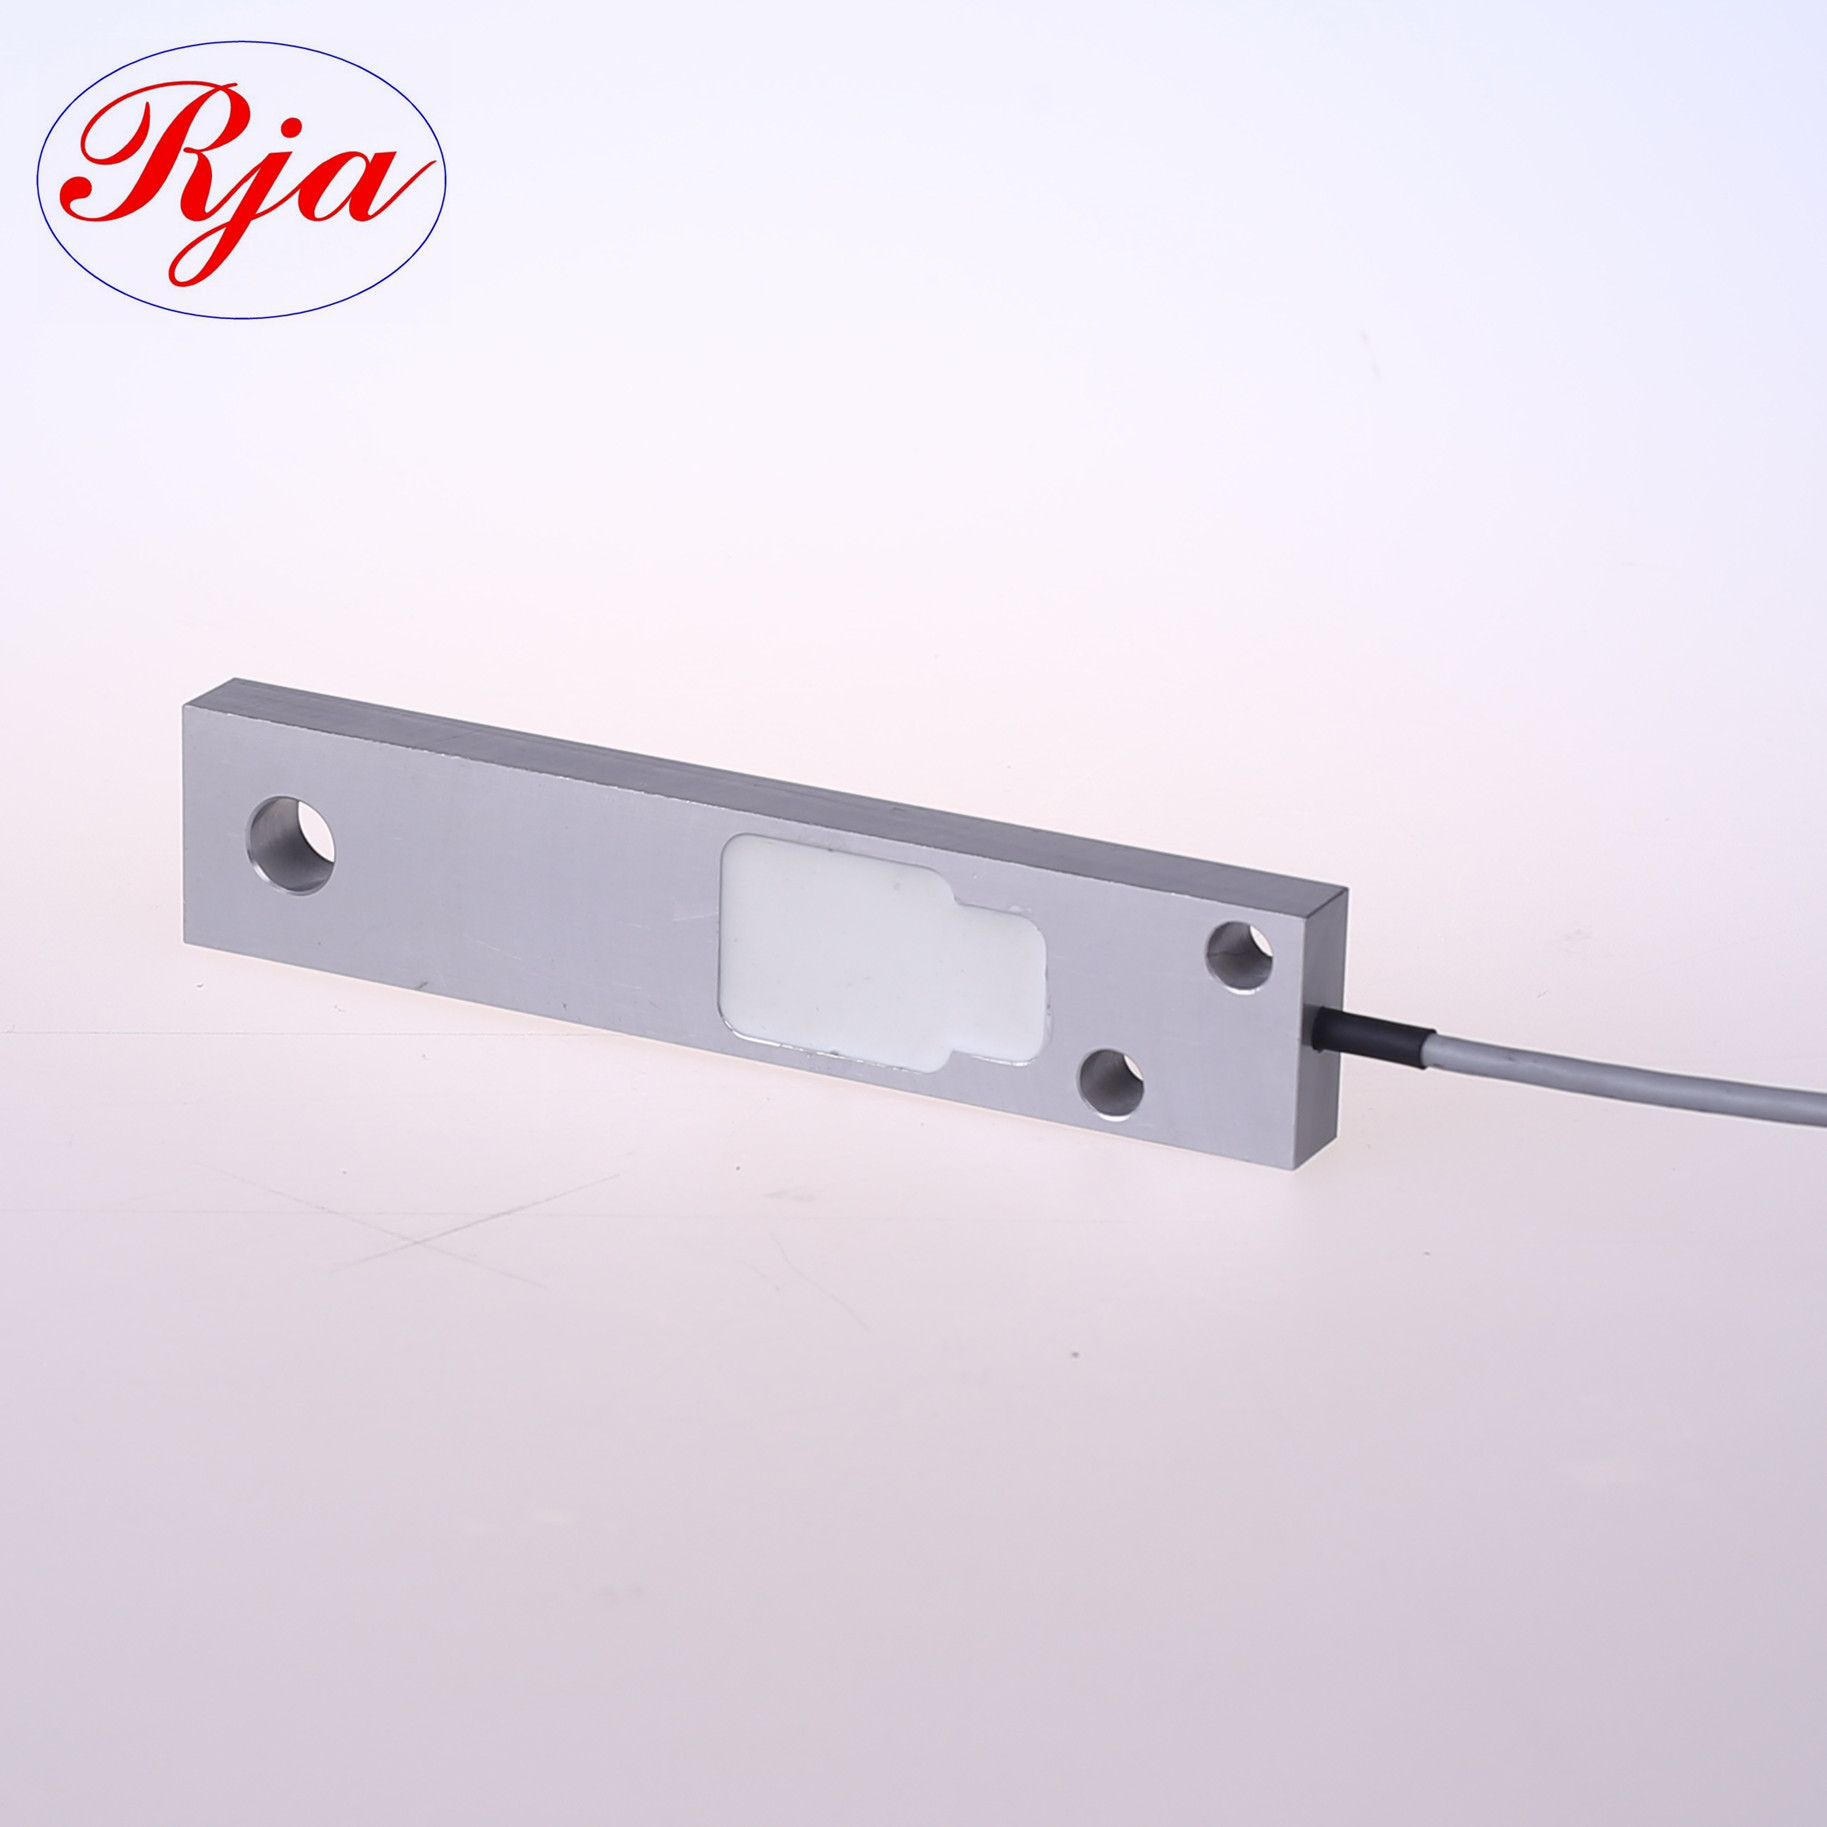 25kg Load Cell For Weighing Scale , Aluminum Alloy Industrial Load Cells